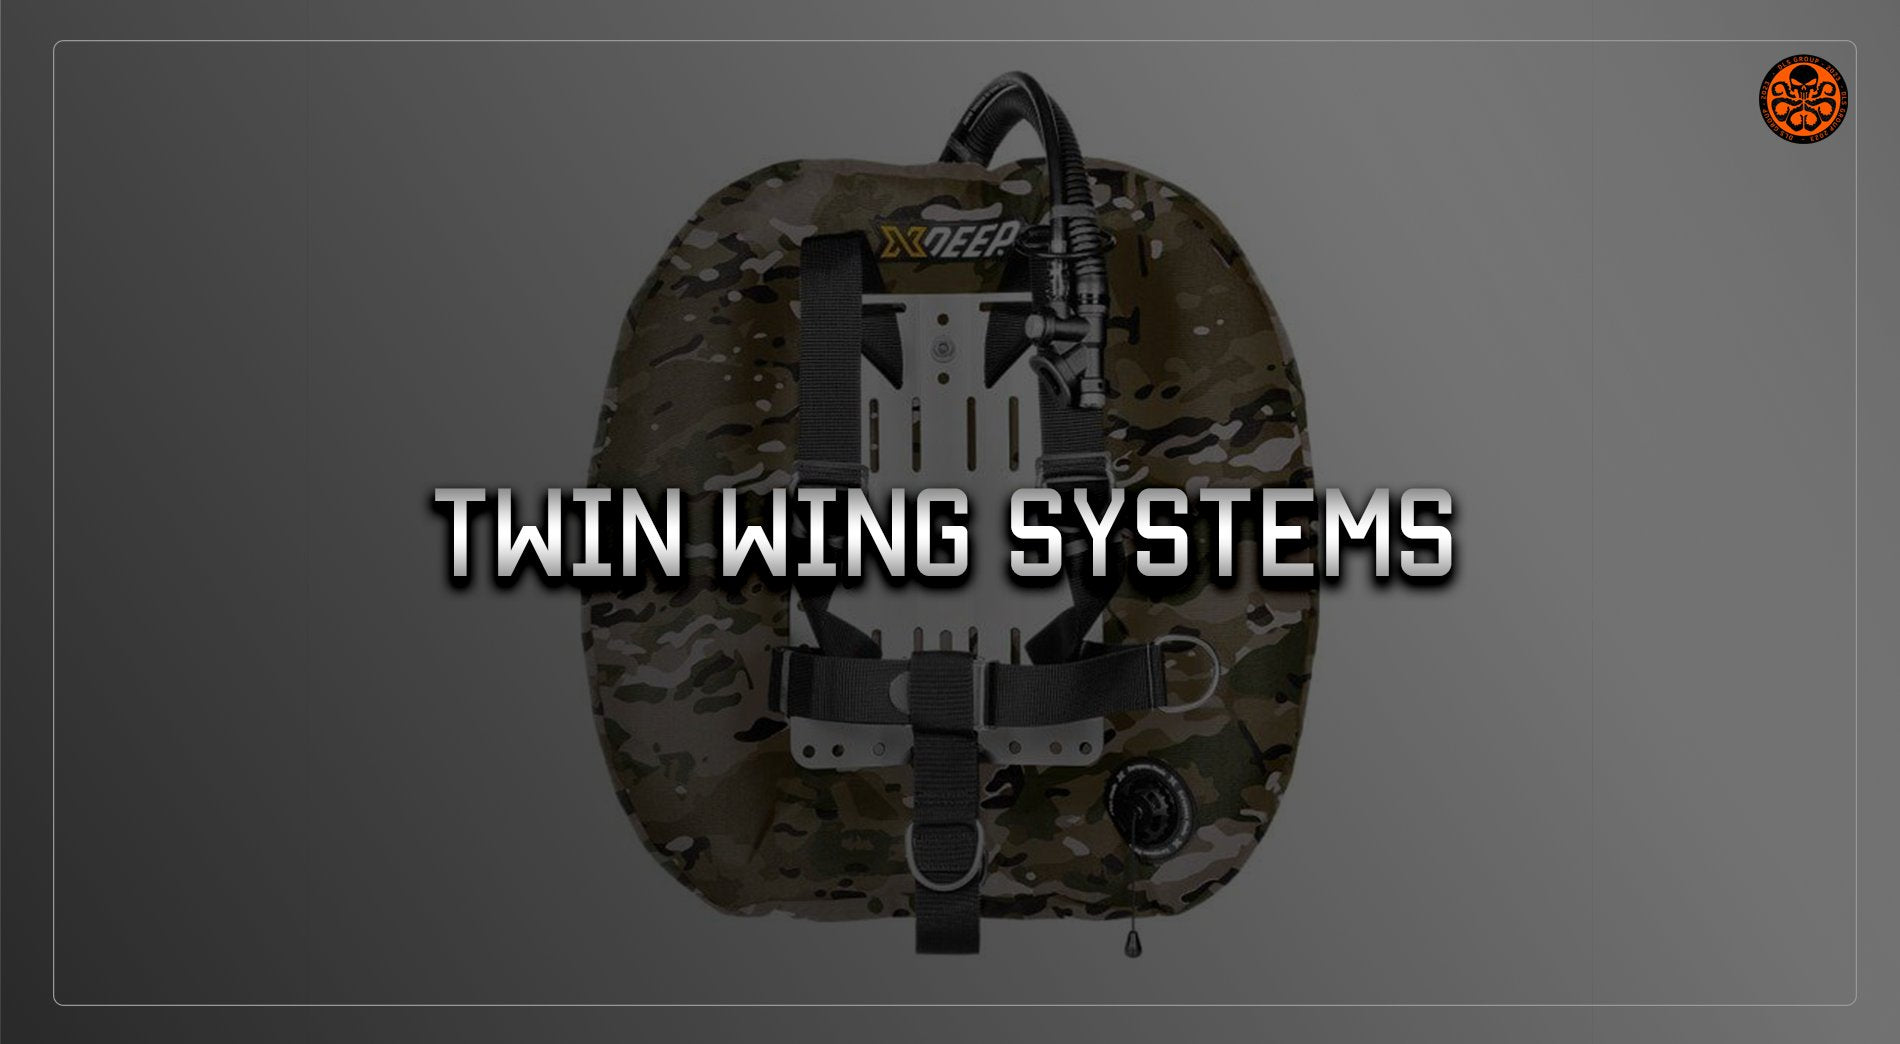 XDEEP Twin Wing Systems